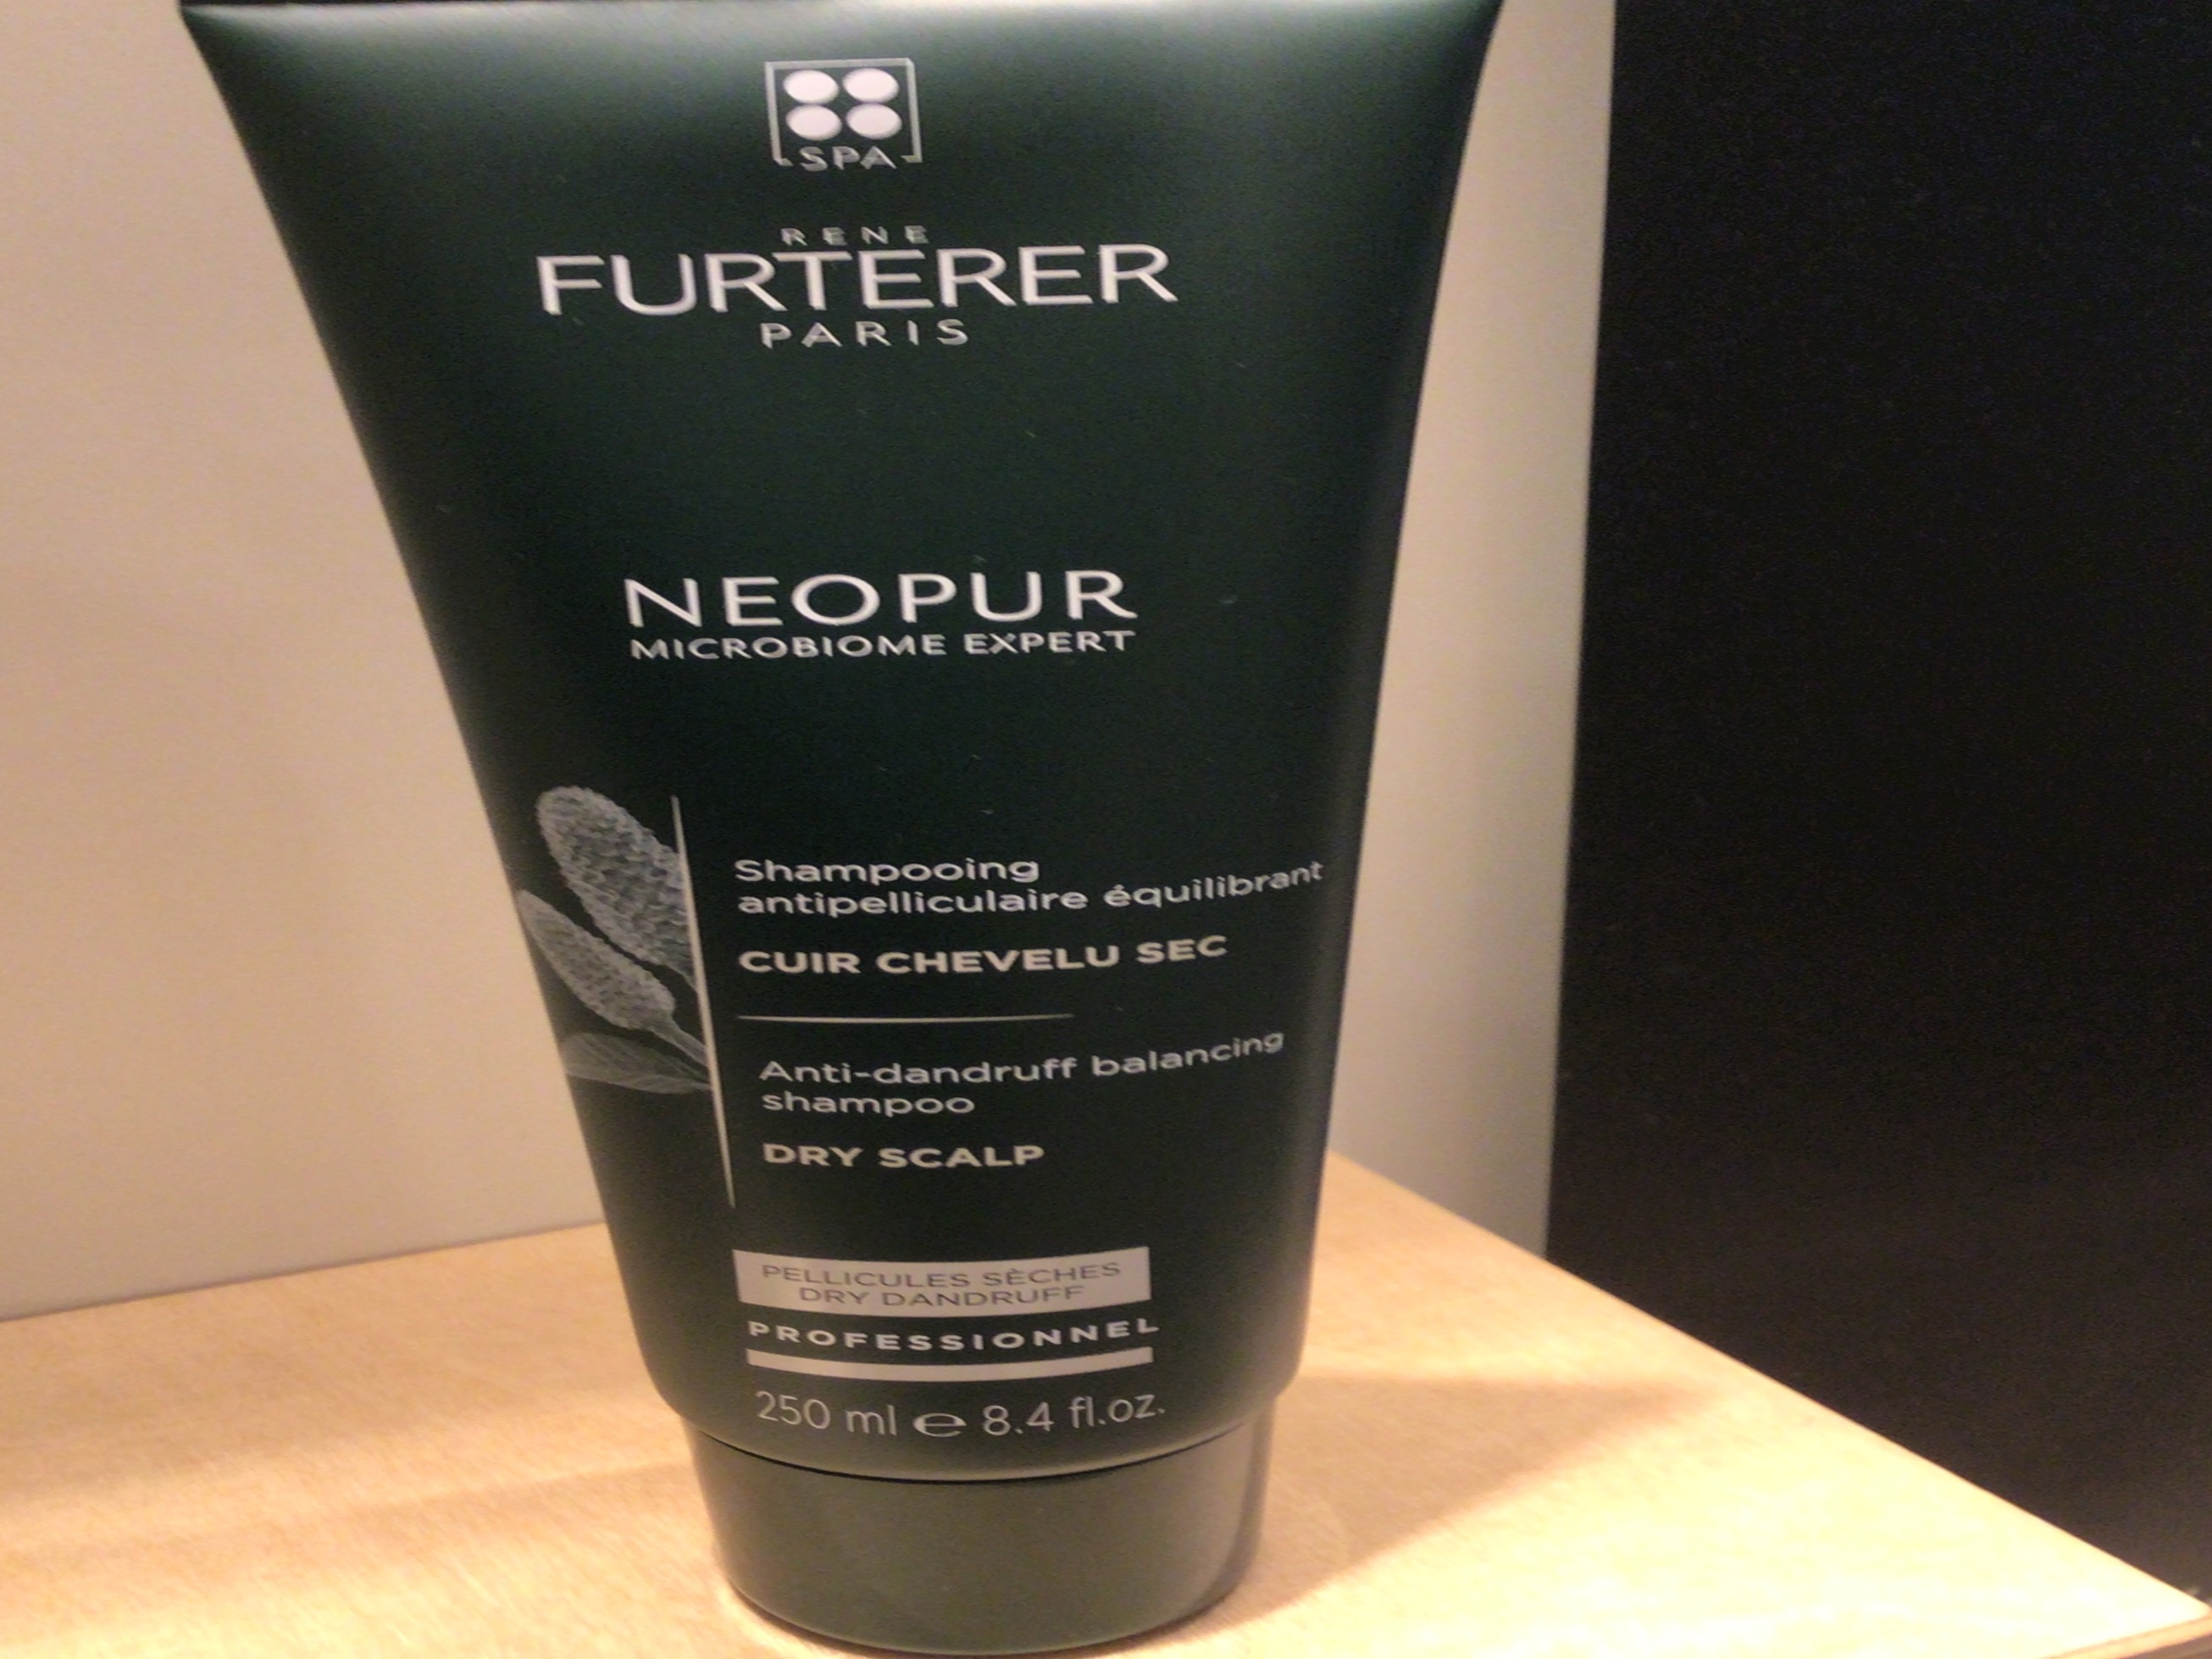 Neopur shampooing antipelliculaire